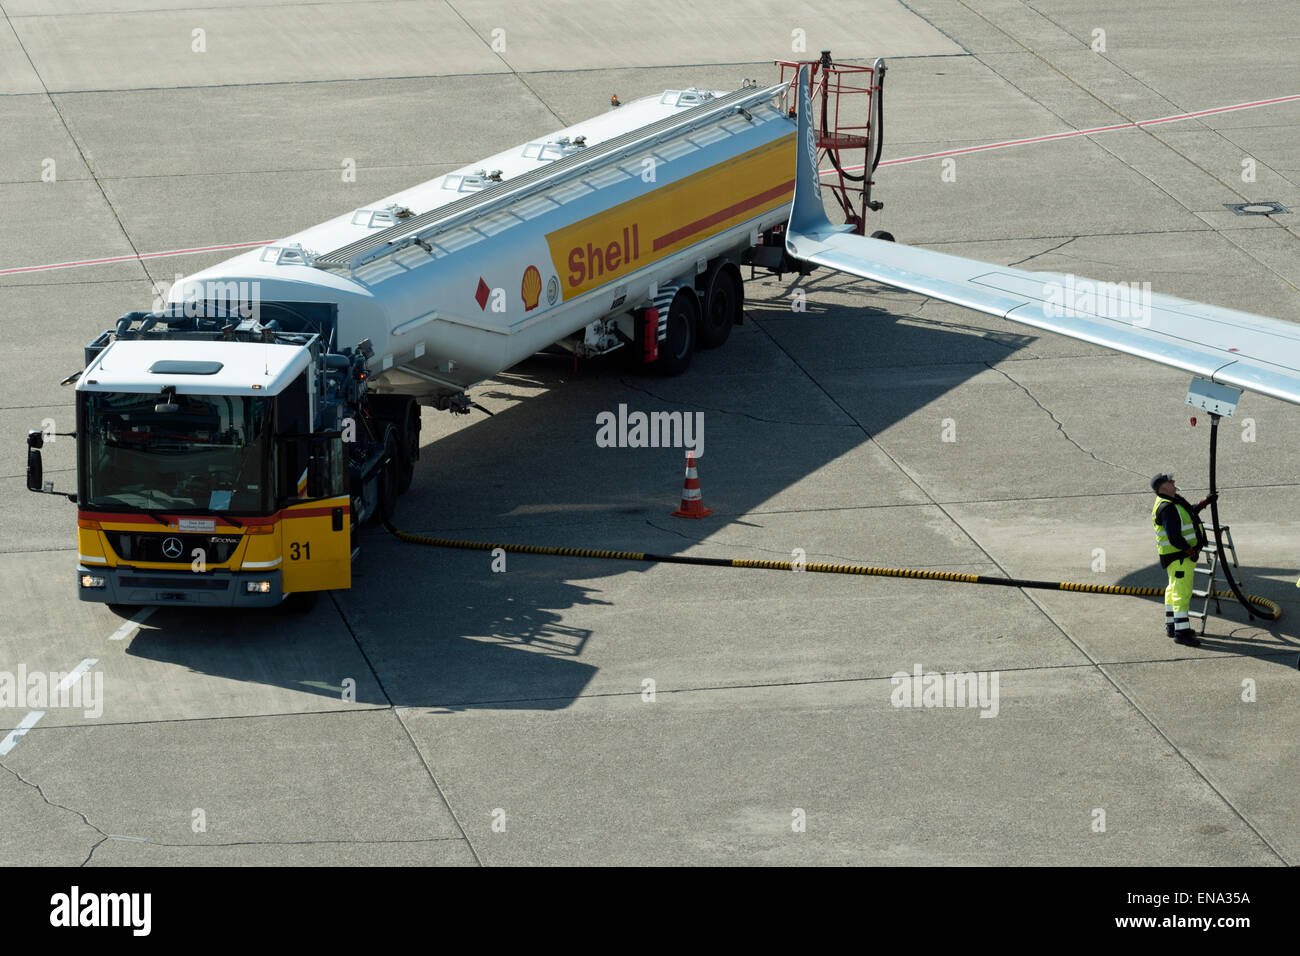 Shell aviation fuel tanker refuelling aircraft at Dusseldorf airport Germany Stock Photo